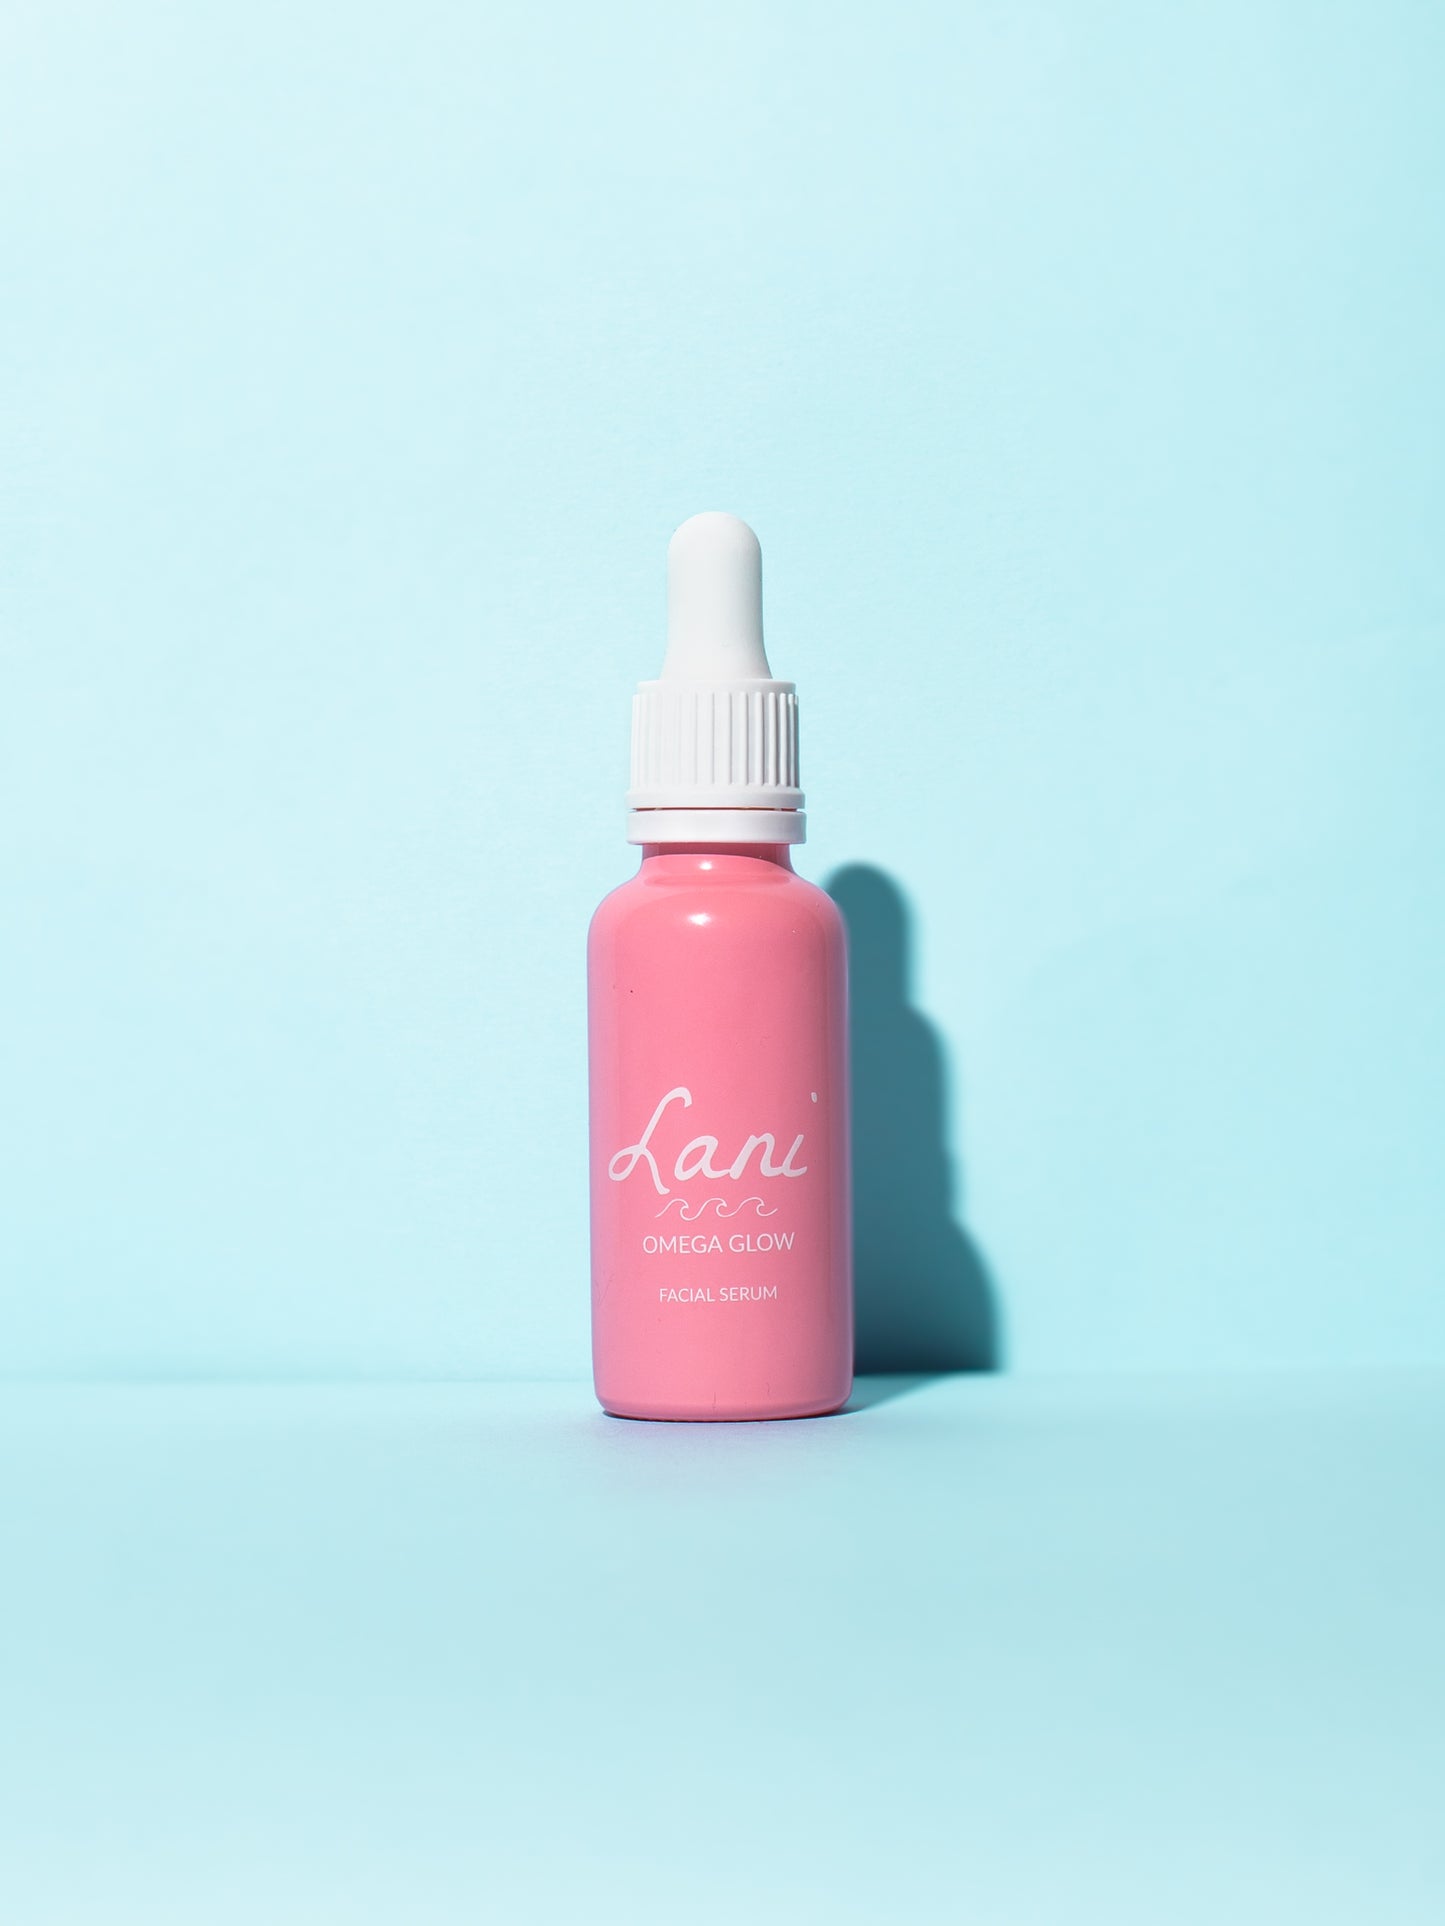 Load image into Gallery viewer, Lani Tropical Omega Glow Serum | helps skin retain moisture, maintain elasticity, balance oil production | Cruelty Free | Natural | Ethical | Low Waste
